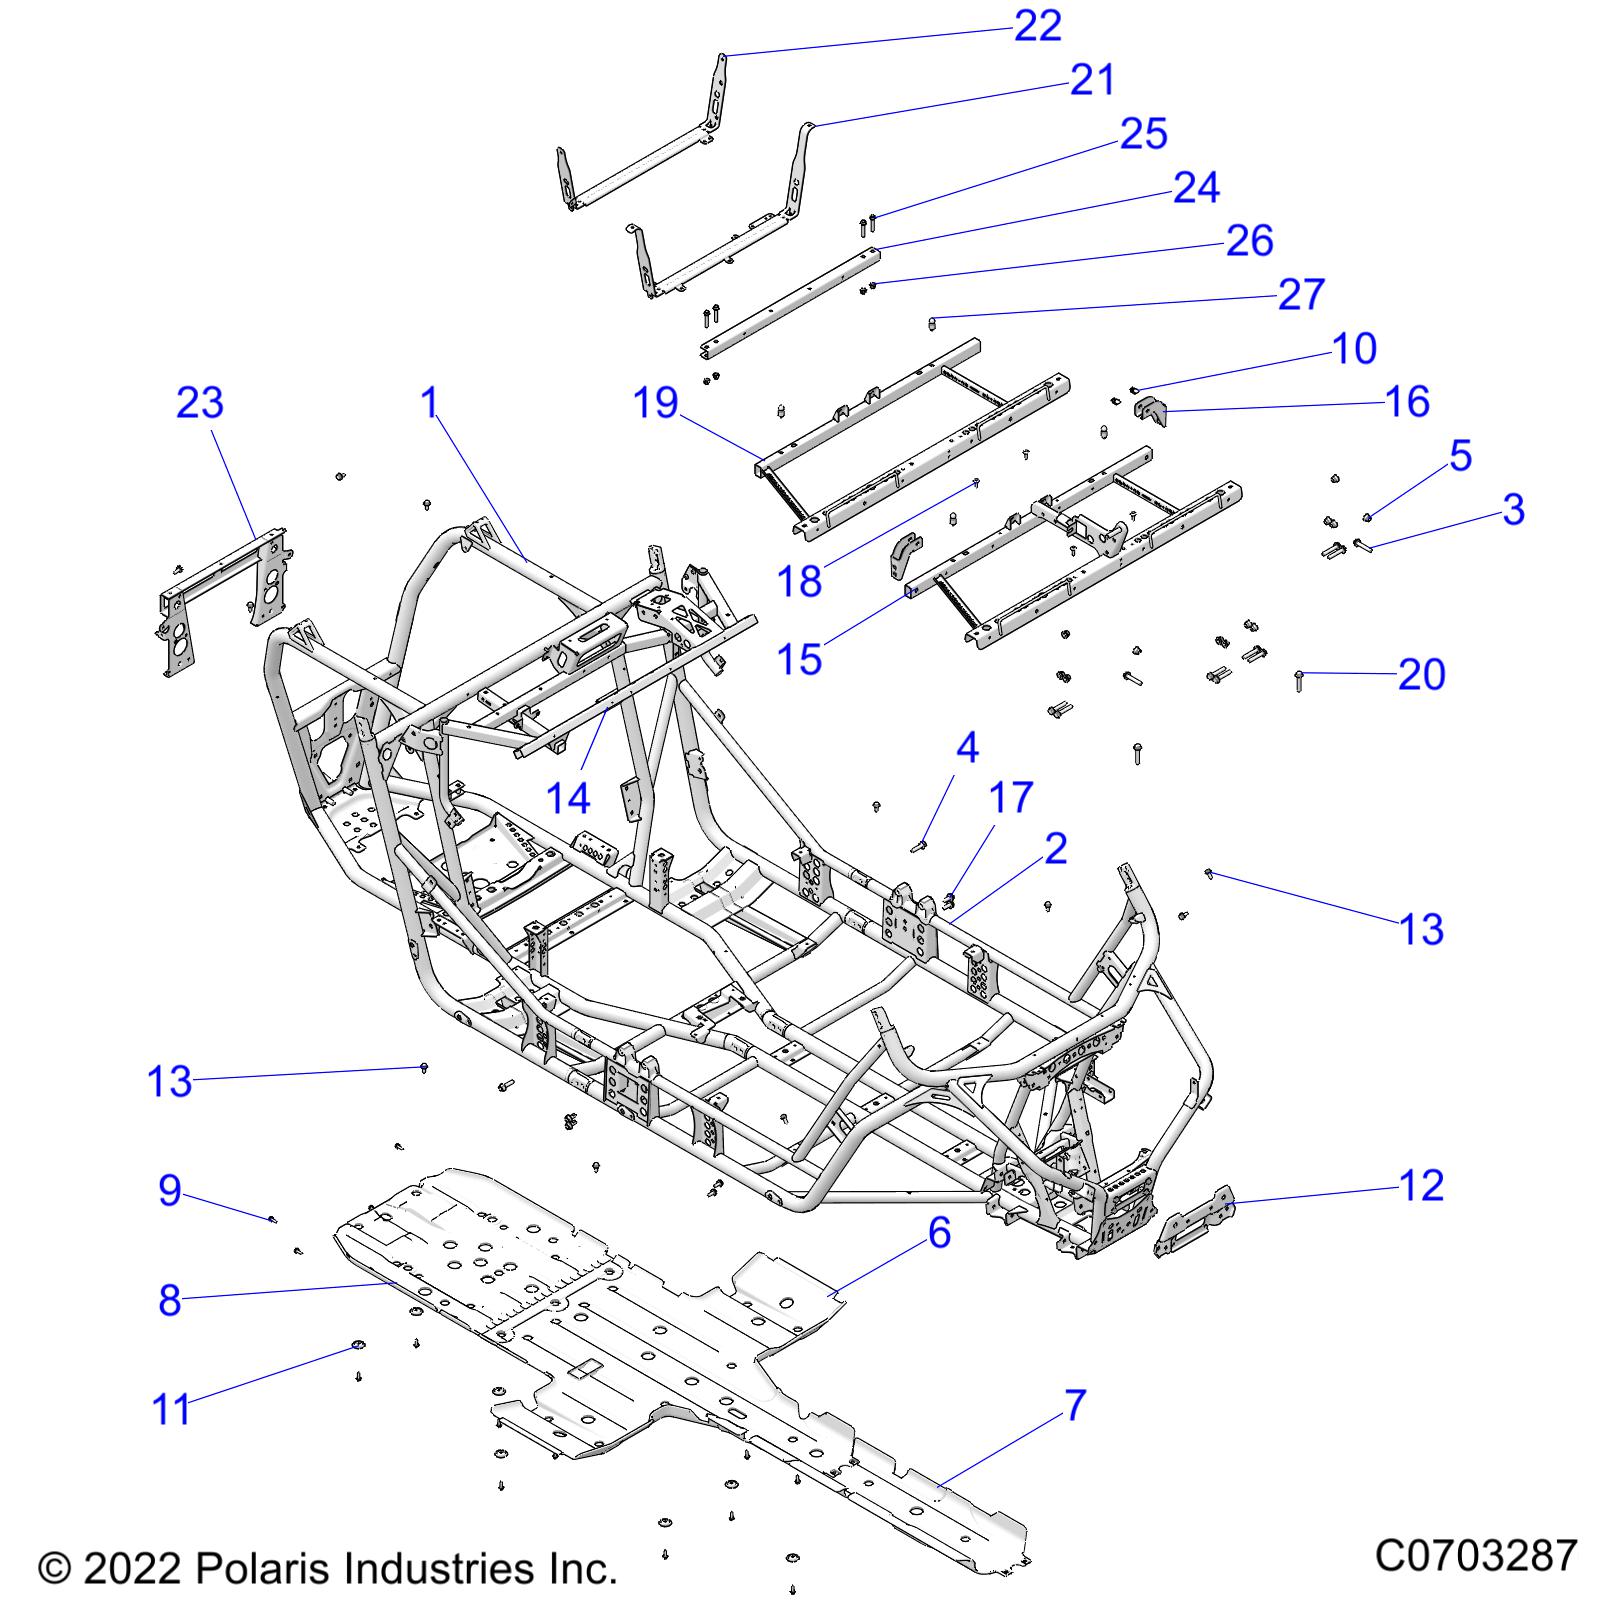 Part Number : 5258097-329 SEAT SUPPORT BRACKET  FRONT  B